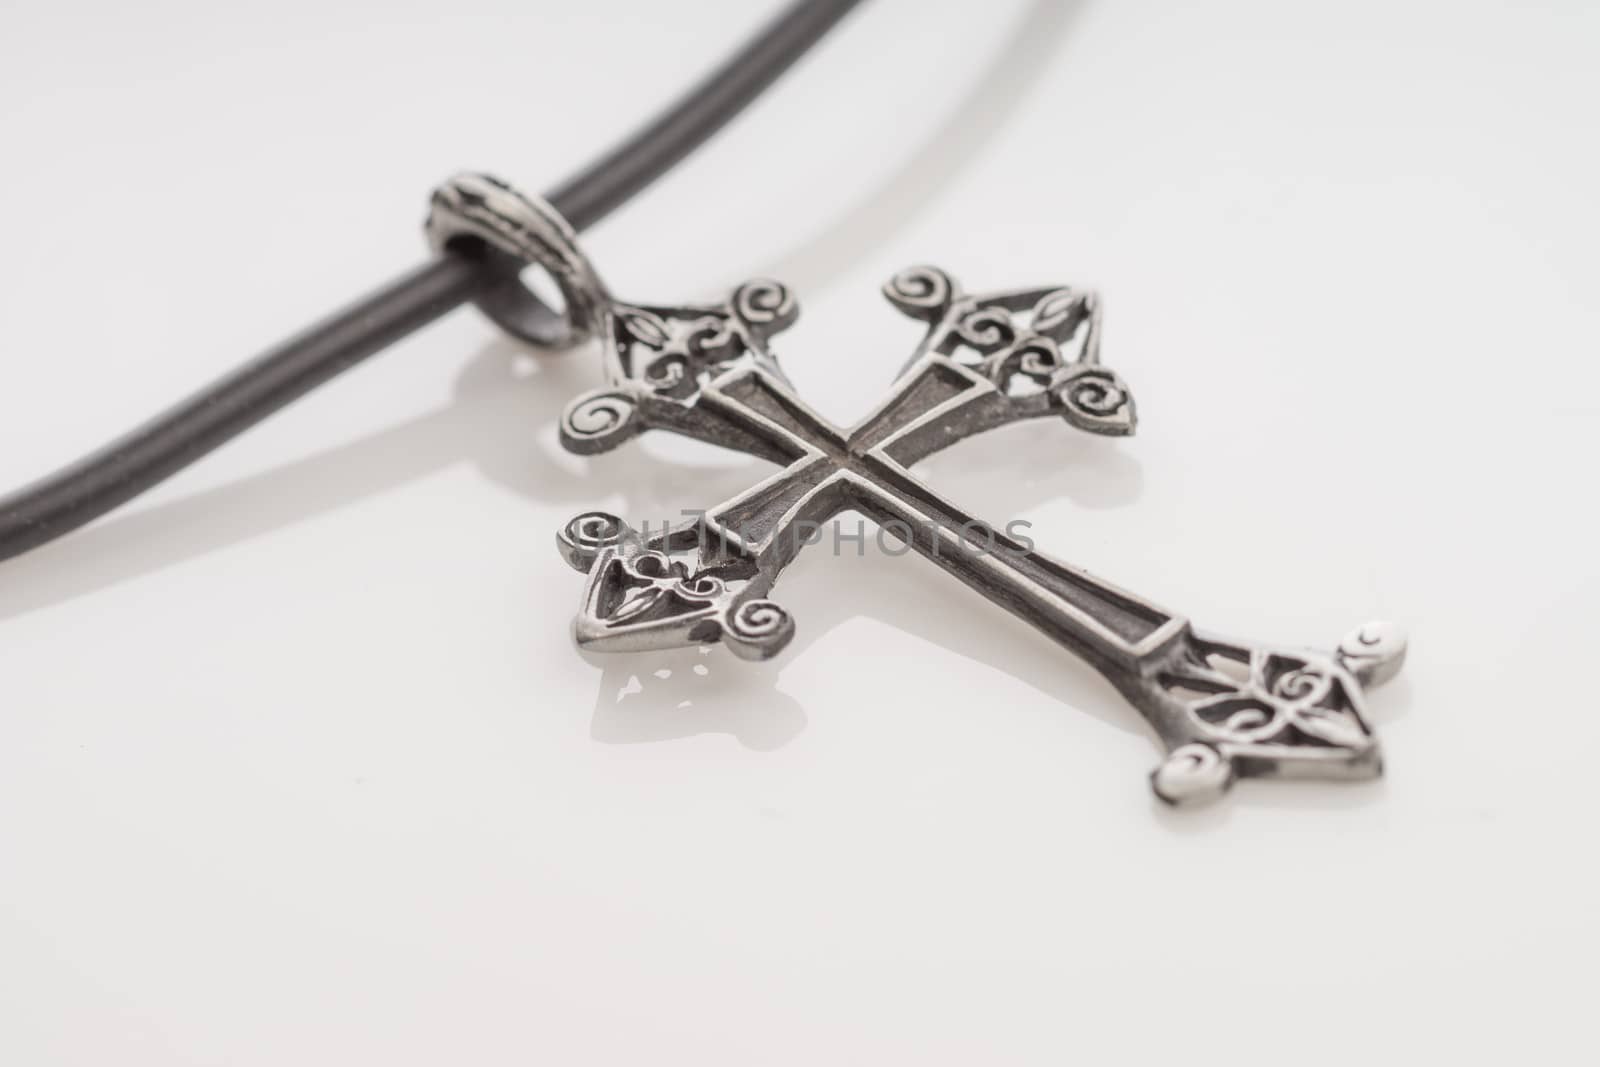 Decorative cross on white background with slight reflection